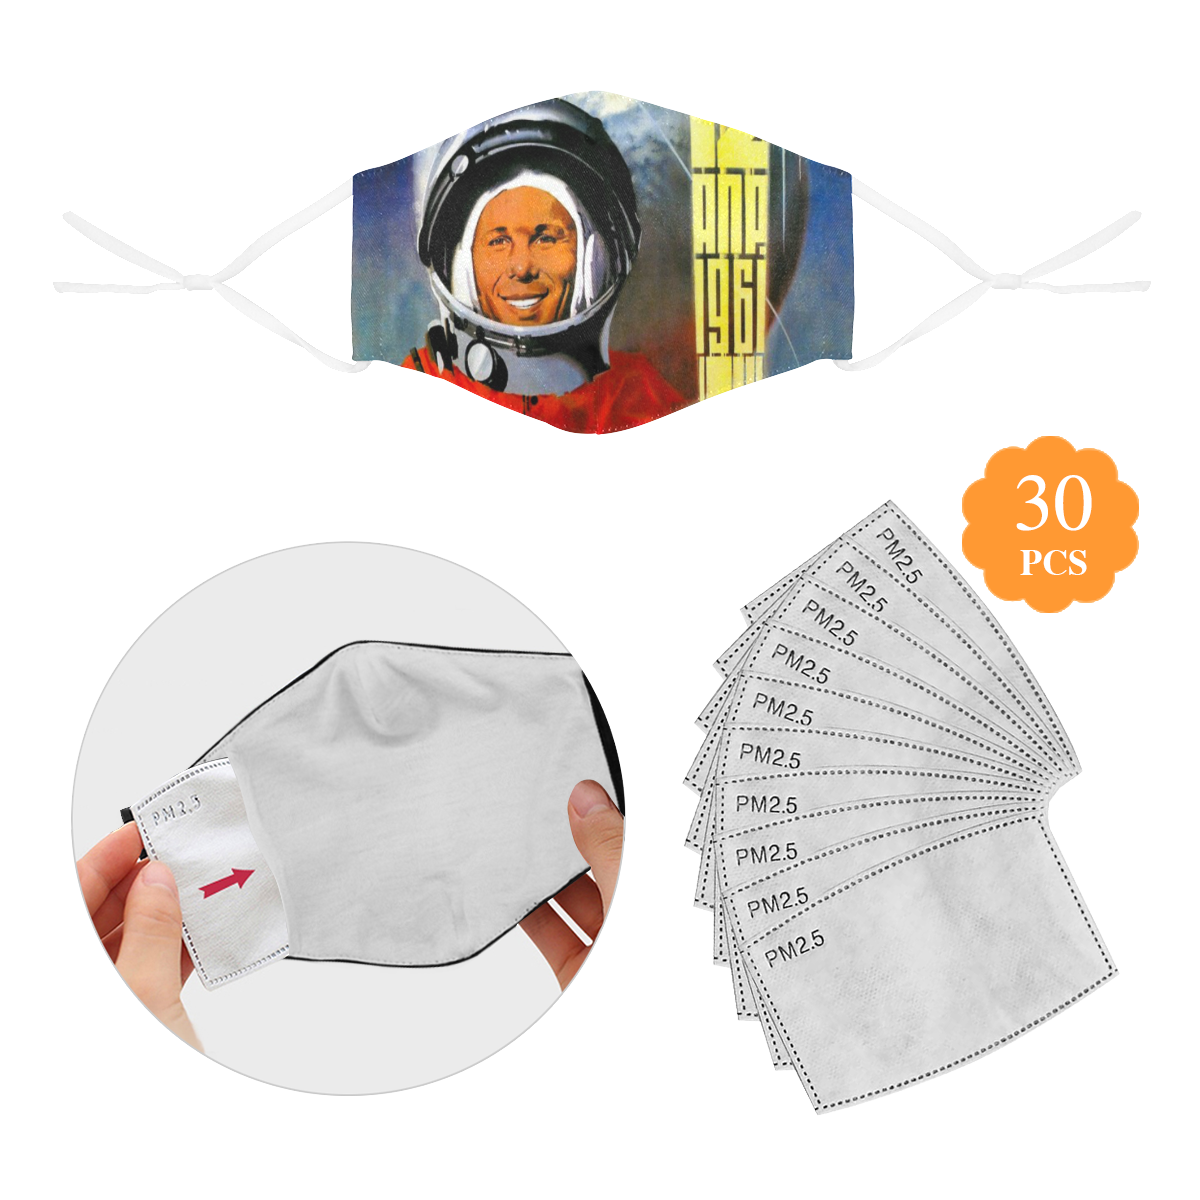 SOVIET SPACE PROGRAM 2 3D Mouth Mask with Drawstring (30 Filters Included) (Model M04) (Non-medical Products)